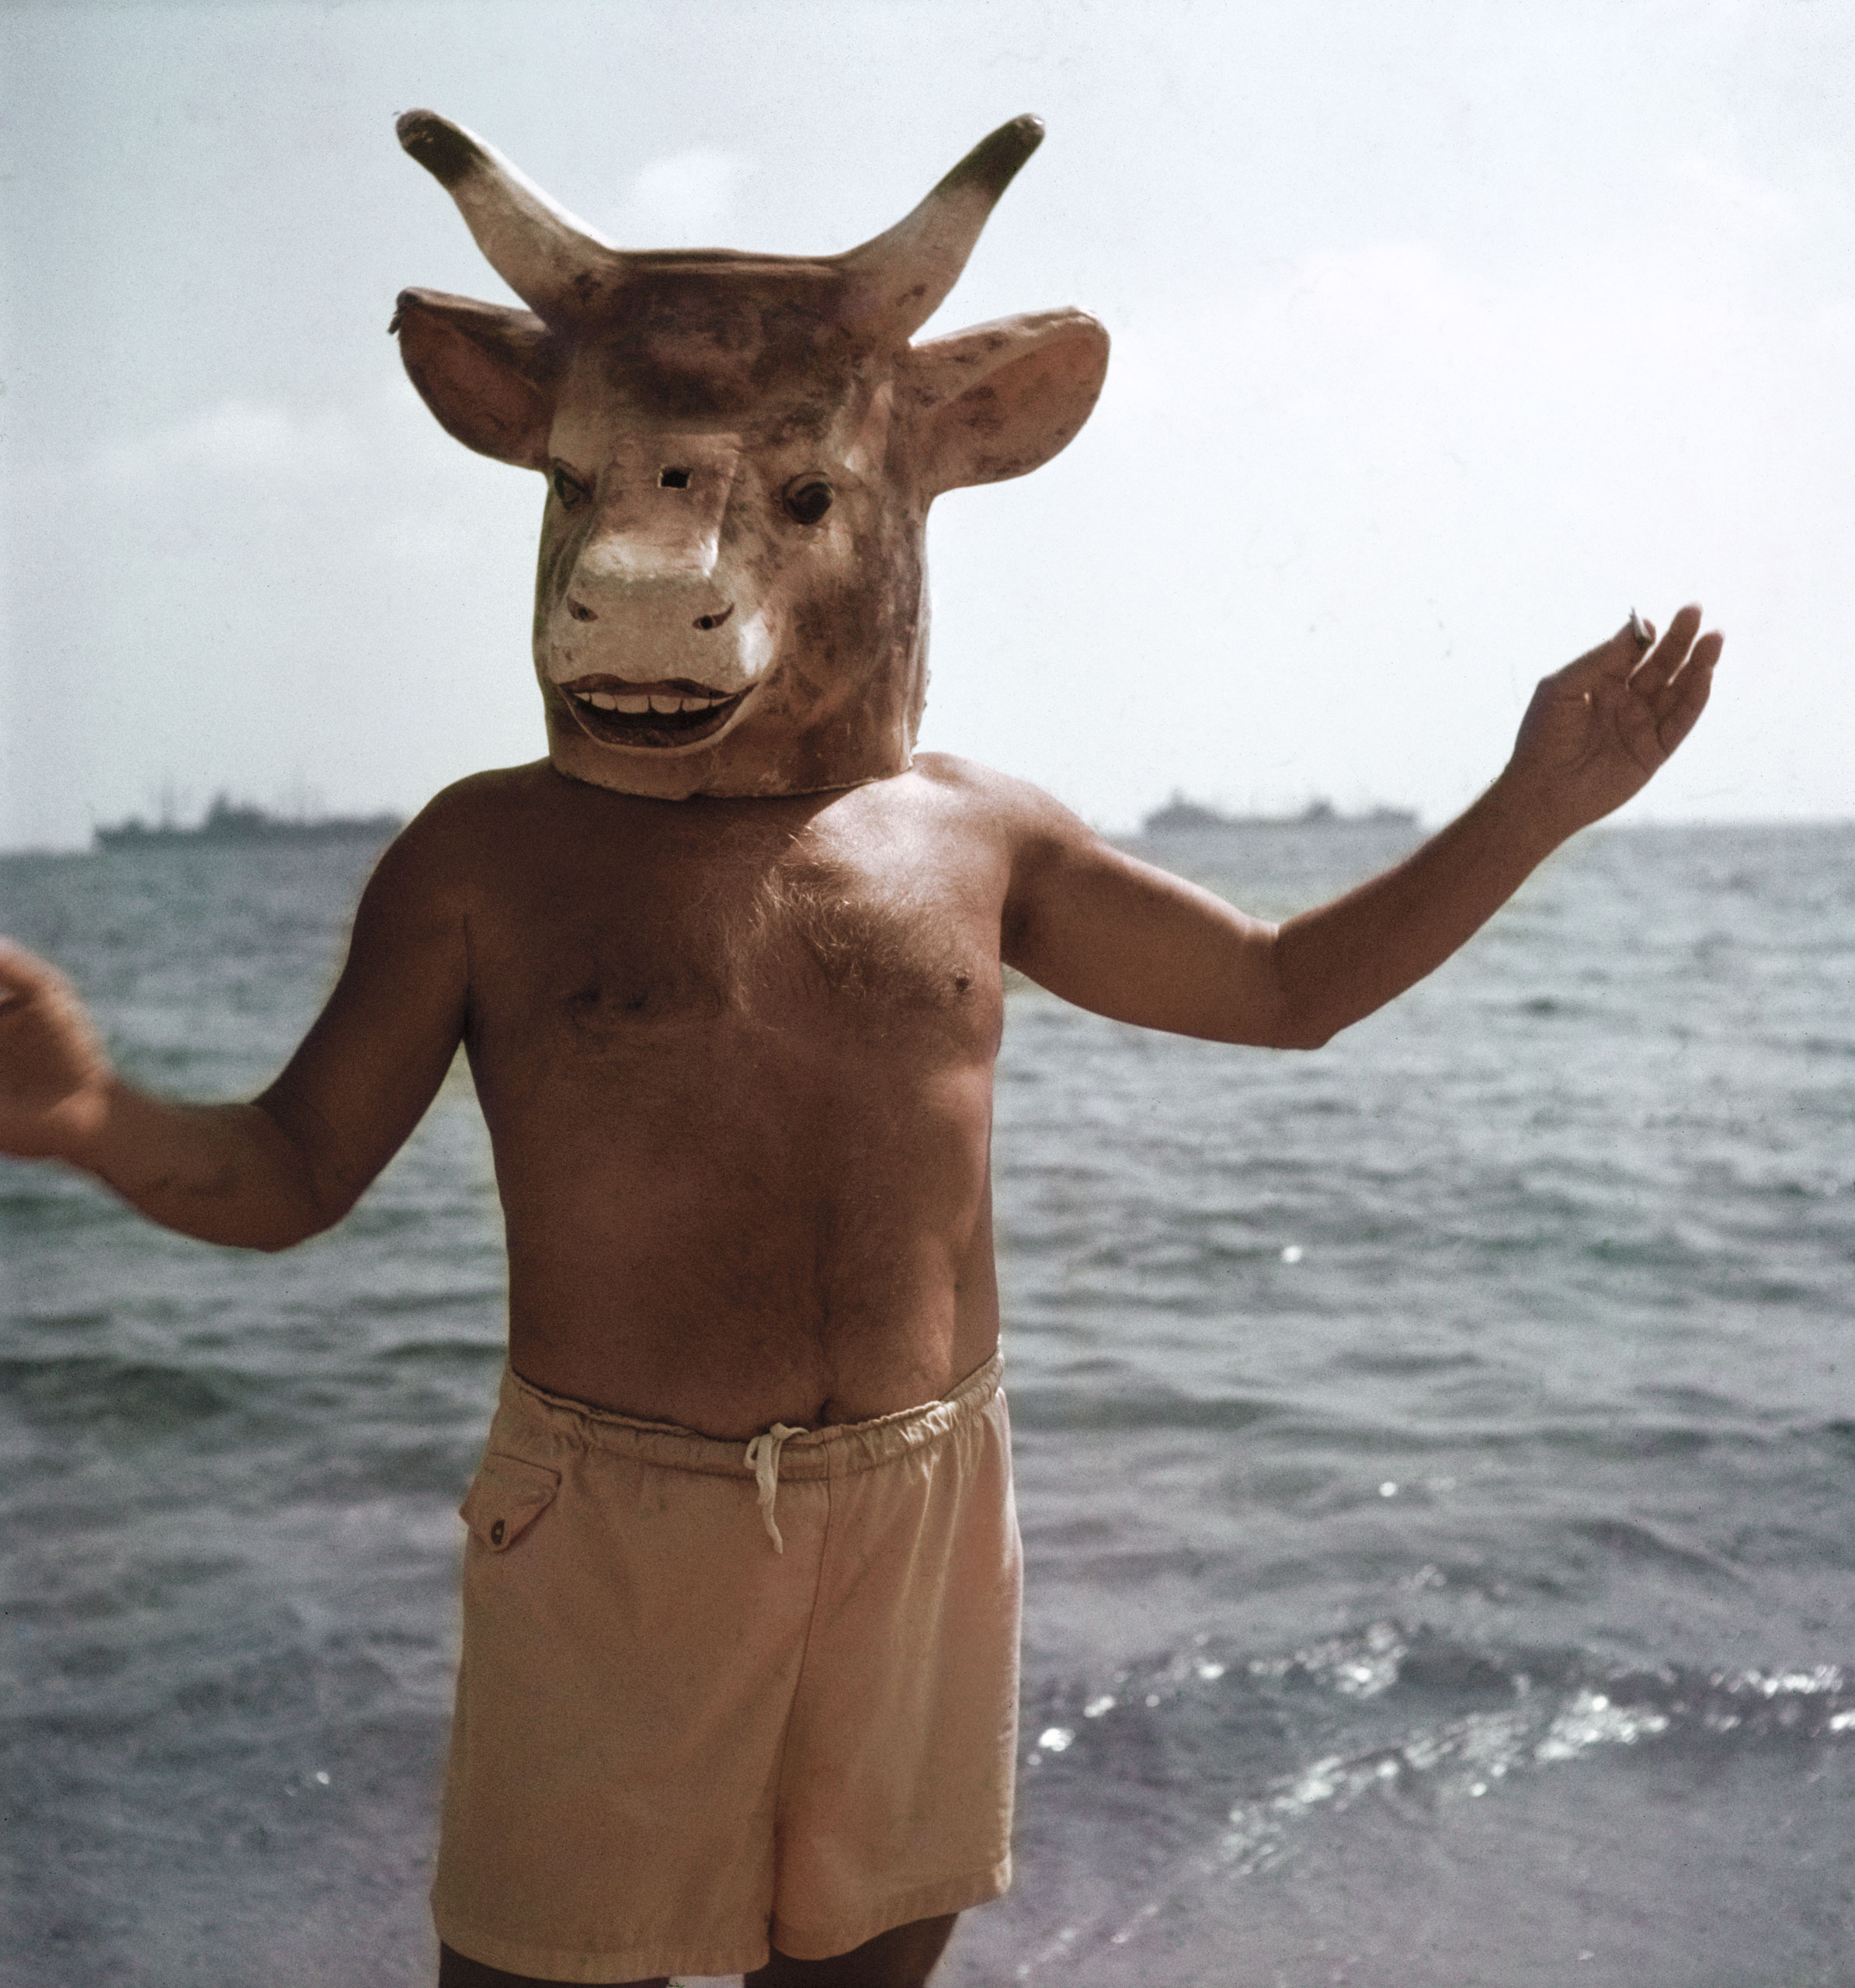 On the beach at Golfe-Juan in 1968, Gjon Mili captures Pablo Picasso reveling in two of his artistic obsessions: the mask and the minotaur, a mythical half-bull, half-man that featured prominently in much of the artist's work.